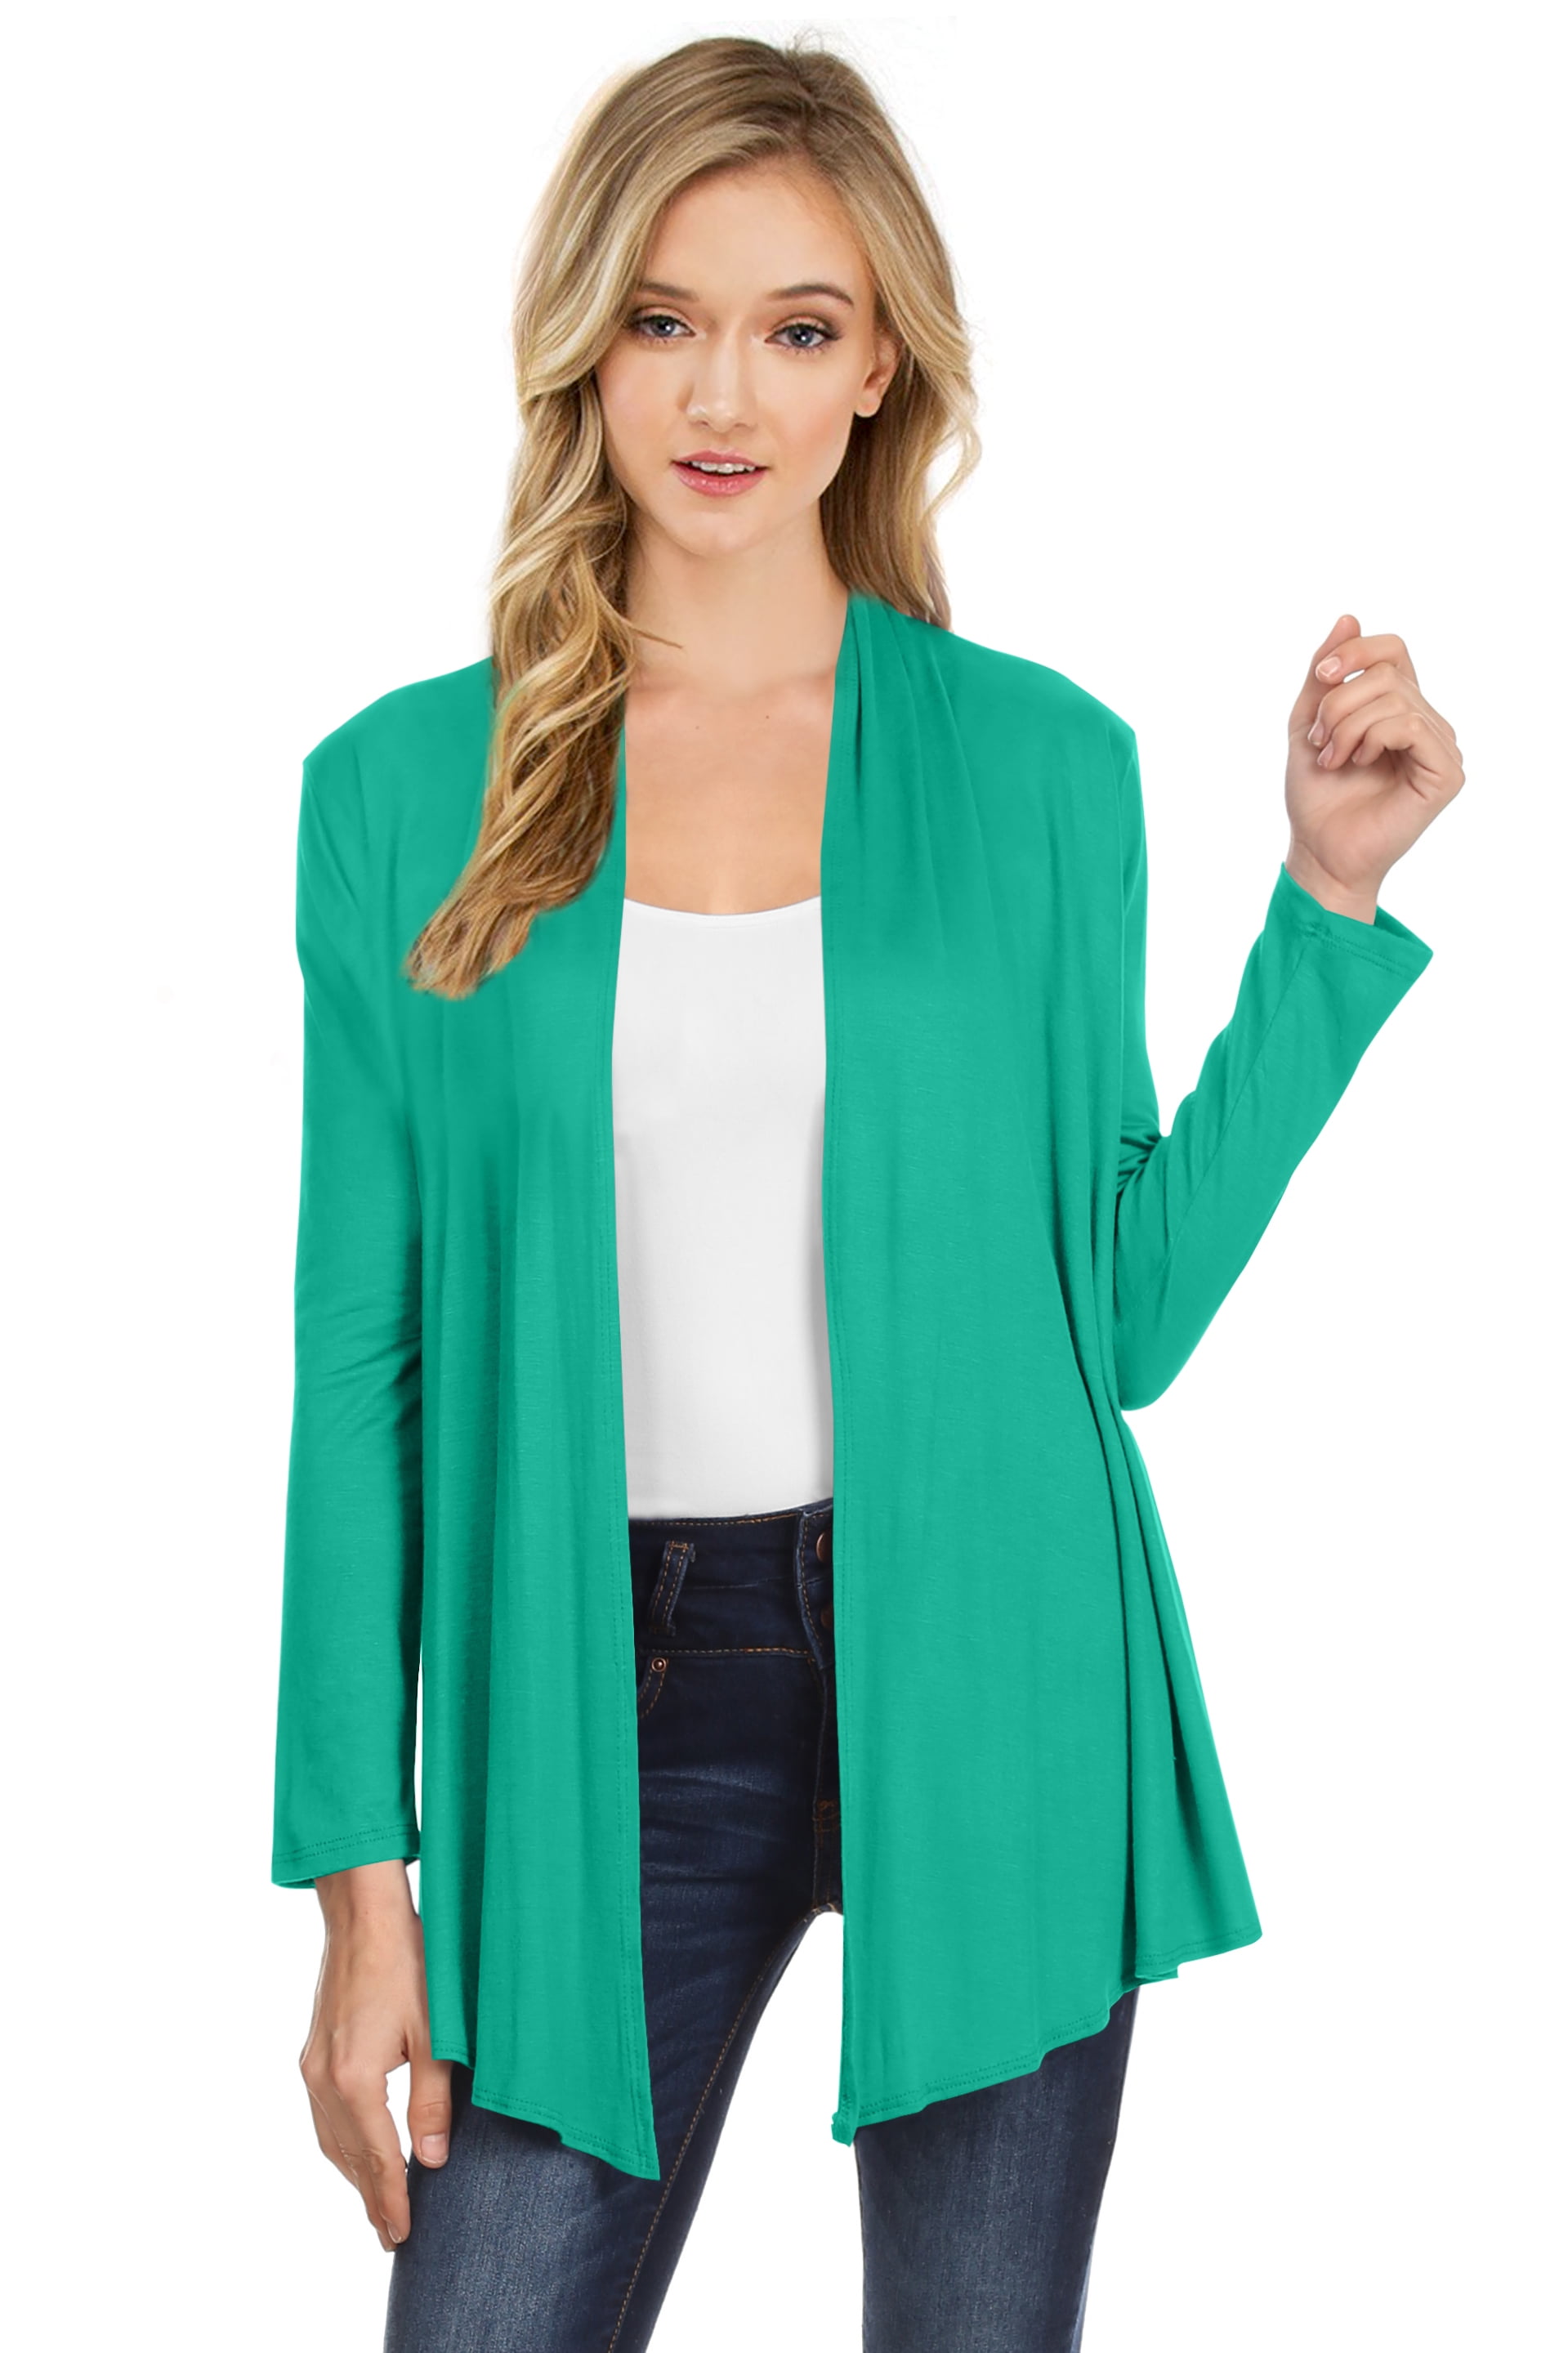 Womens Long Sleeve Slouchy Cardigan Open Front Draped with Pockets Mid Length US